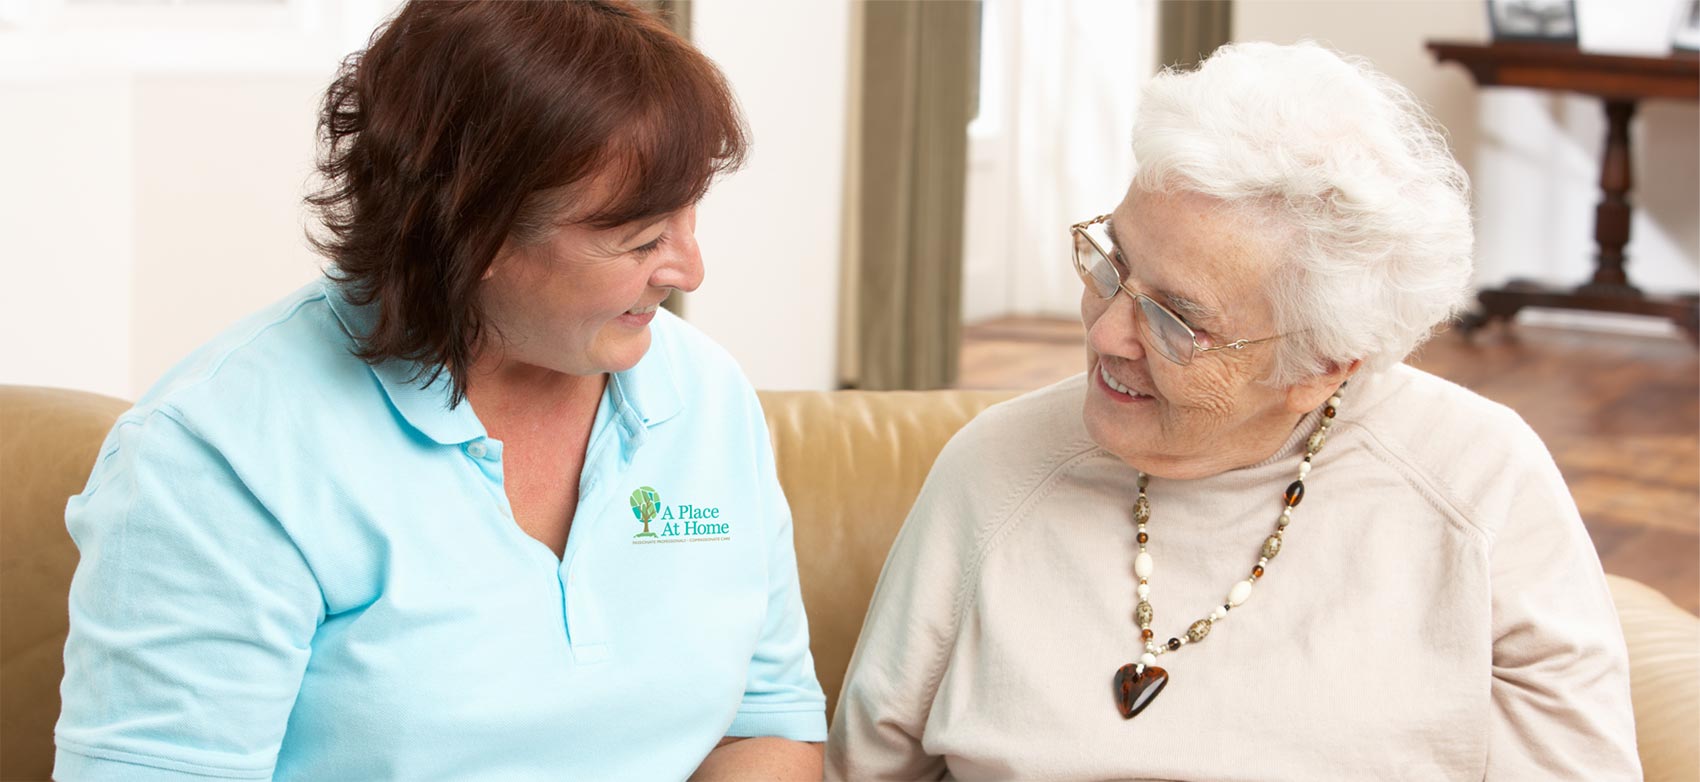 A caregiver from A Place At Home speaks to a senior woman she is assisting.